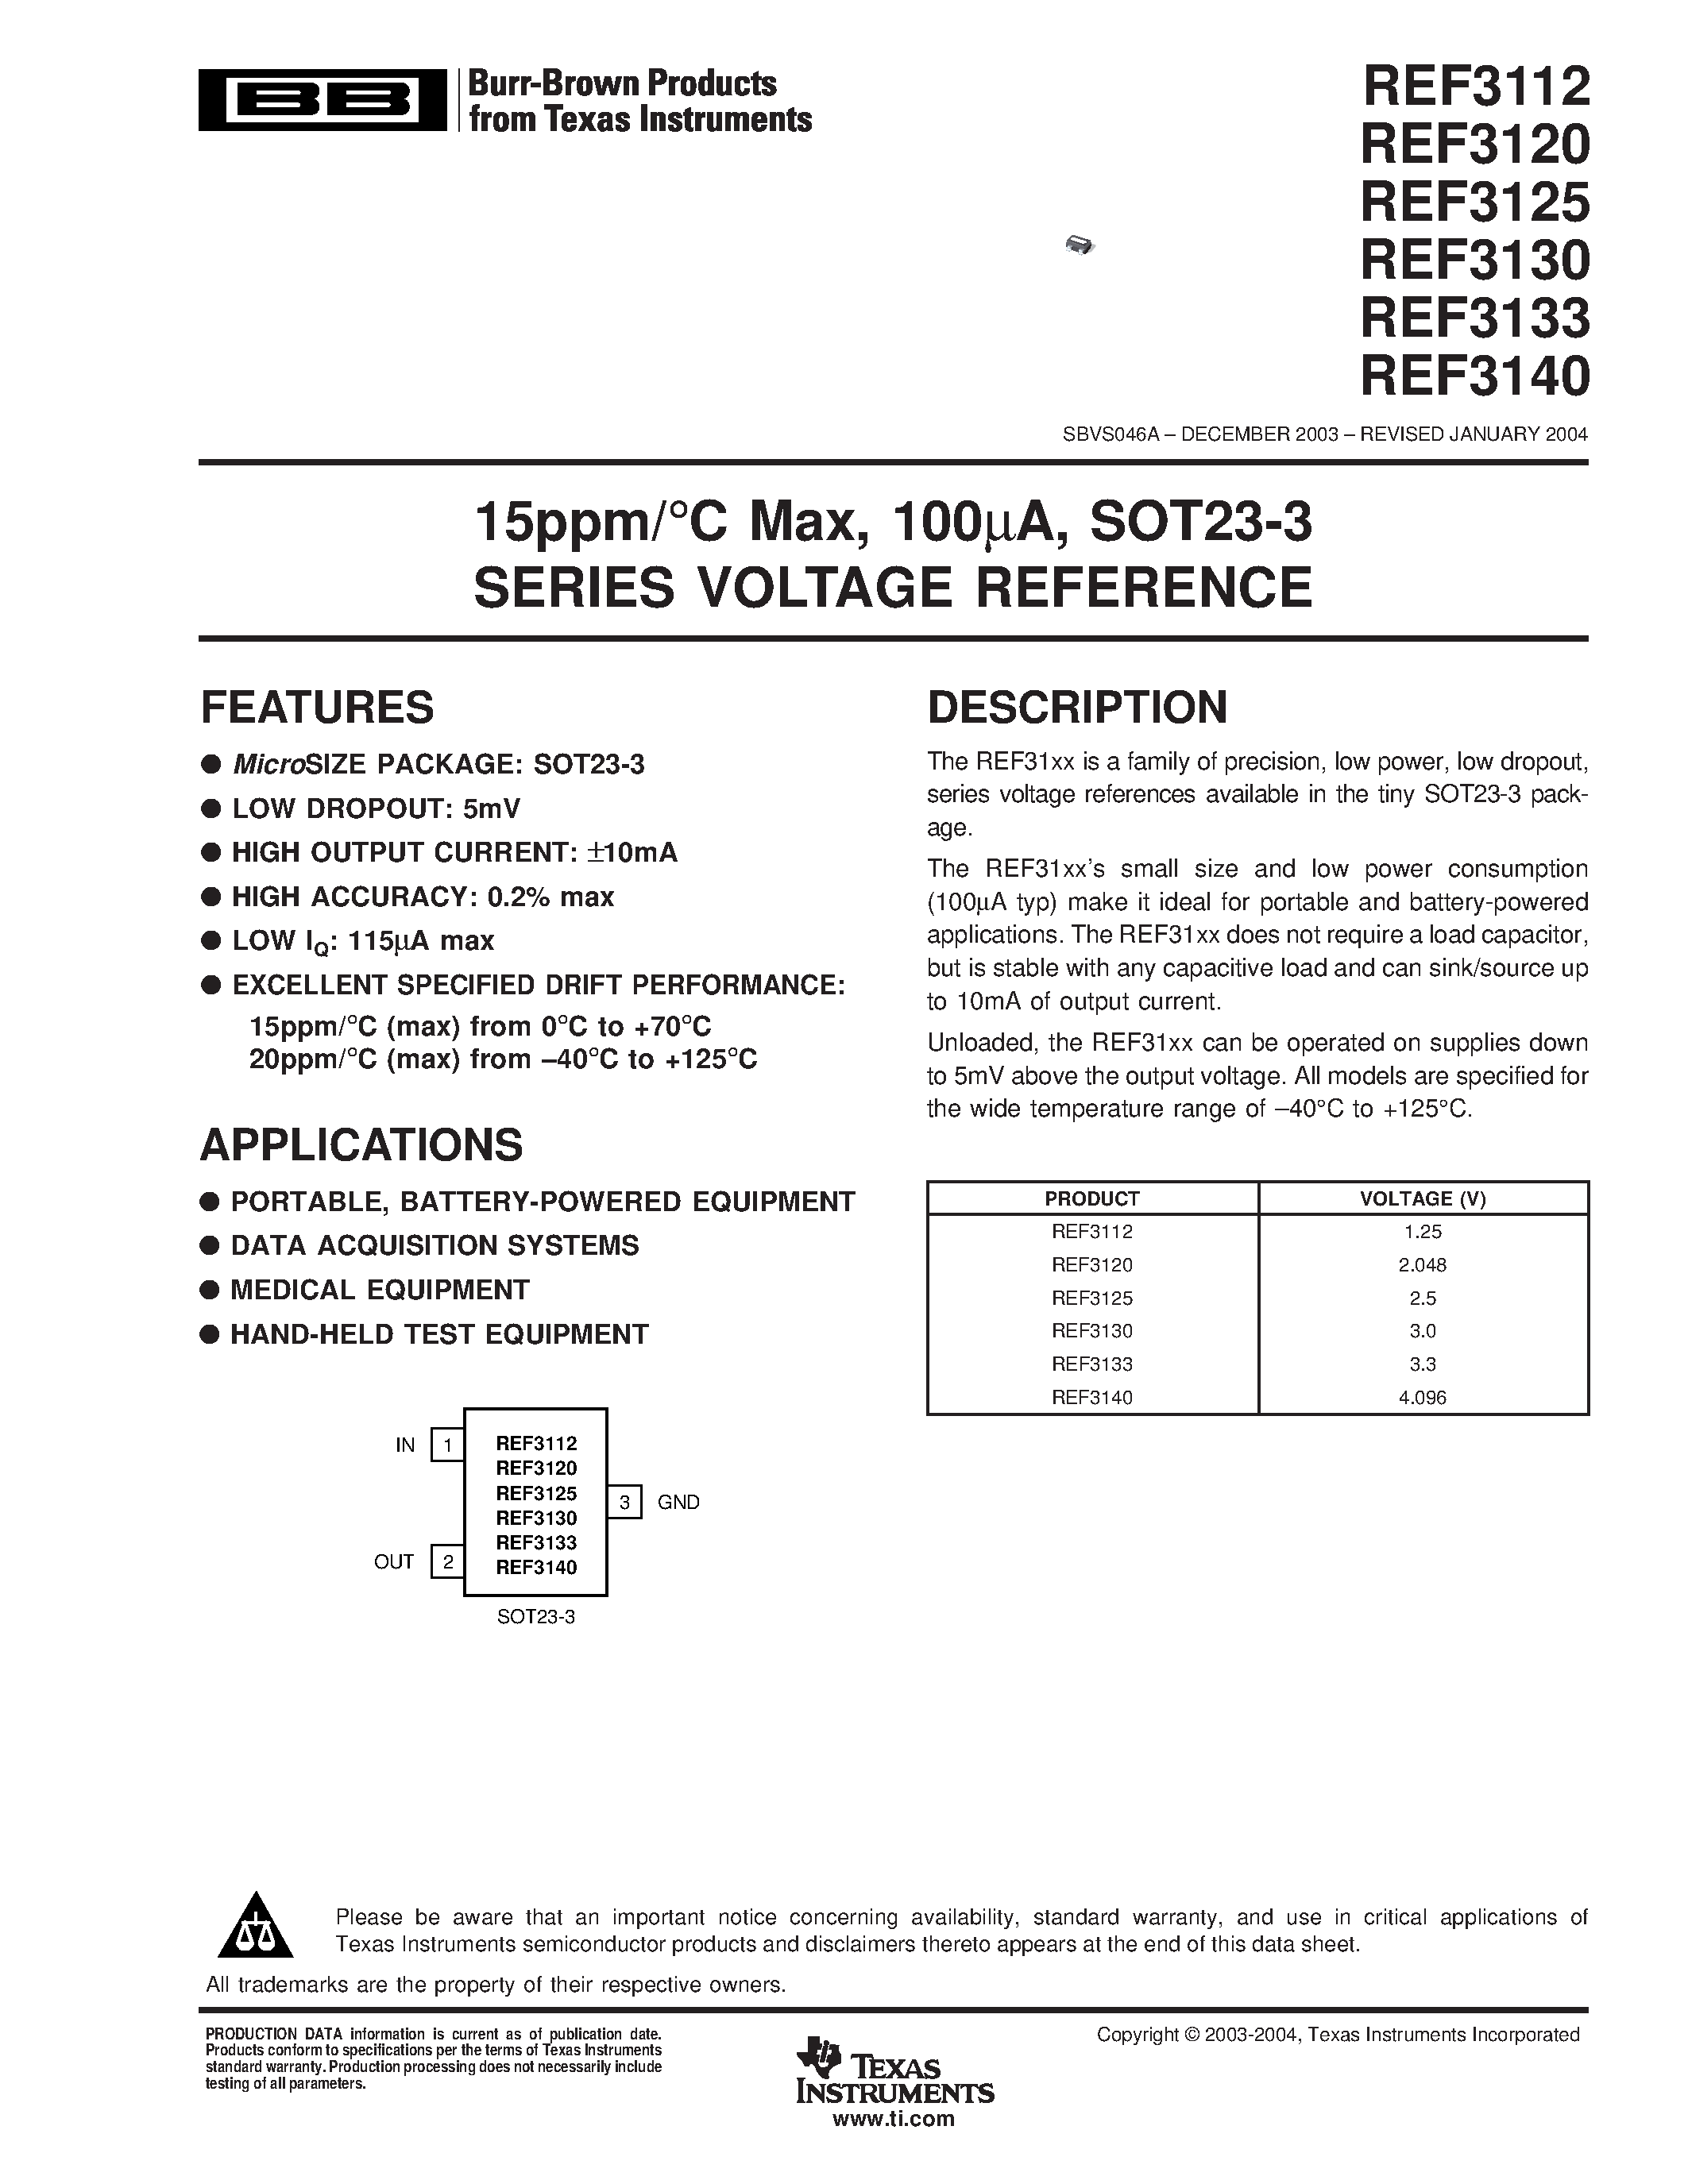 Даташит REF3125 - 15ppm/C Max/ 100UA/ SOT23-3 SERIES VOLTAGE REFERENCE страница 1